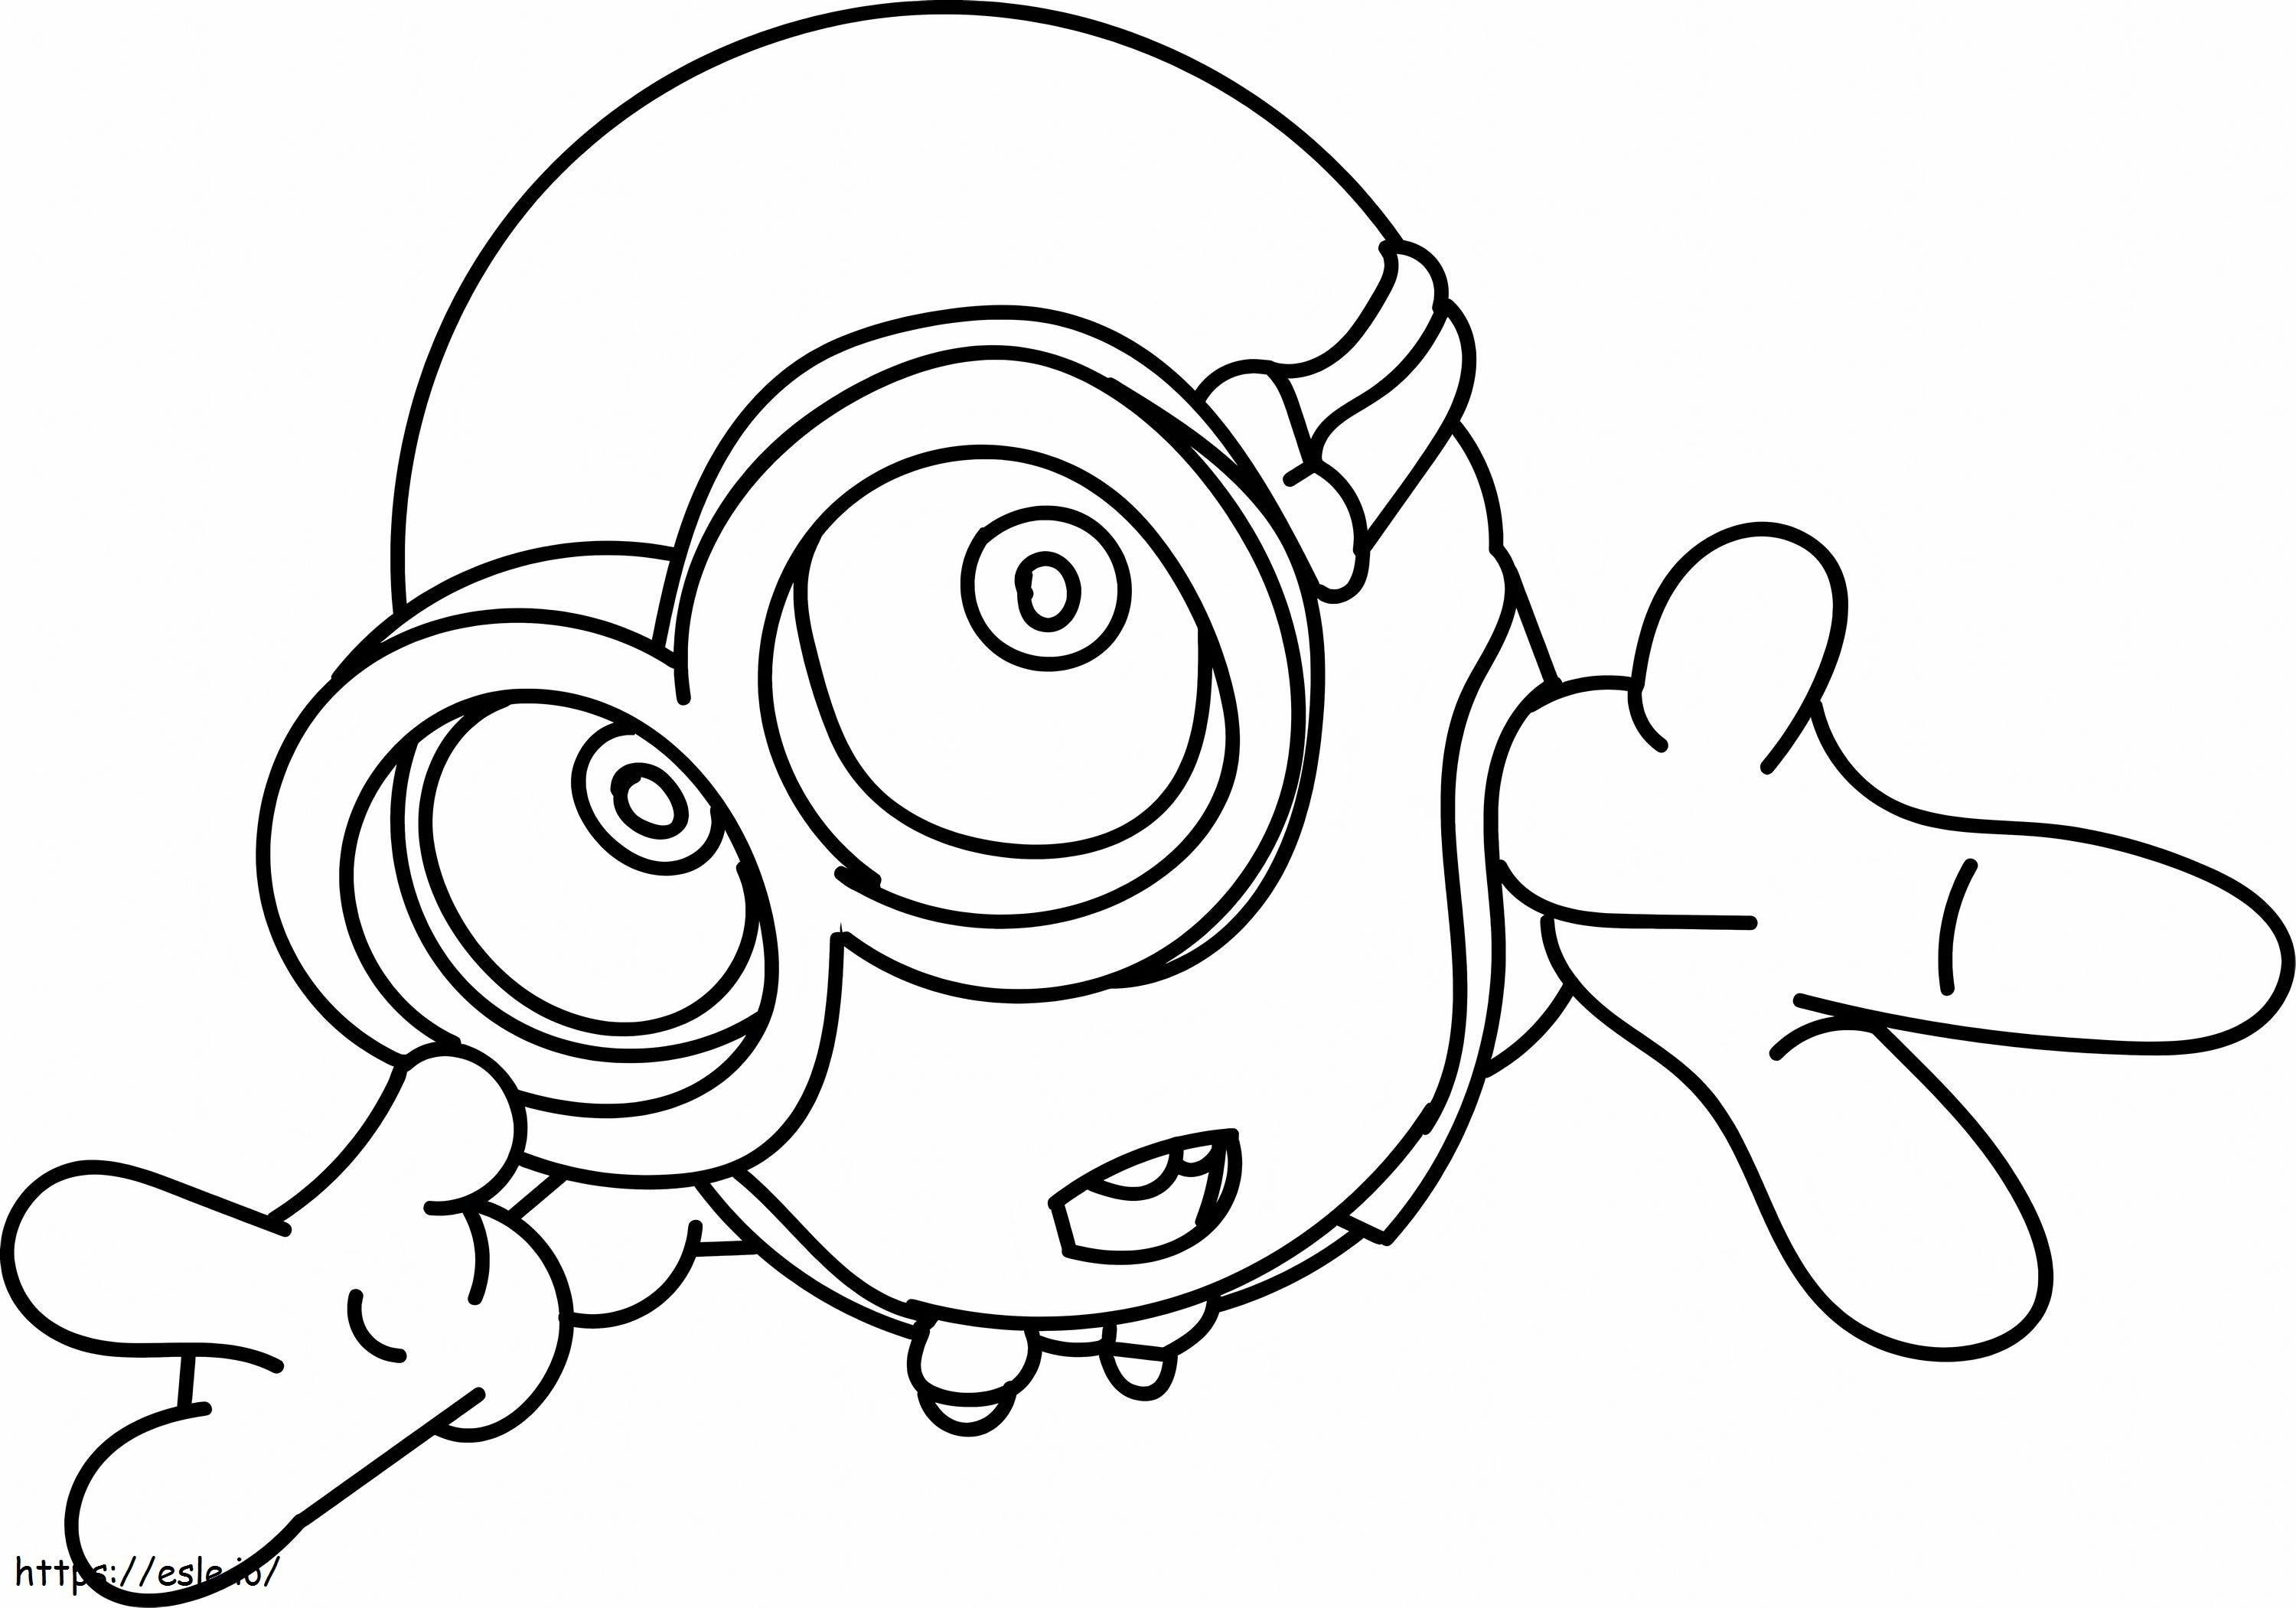 Amazing Minions coloring page